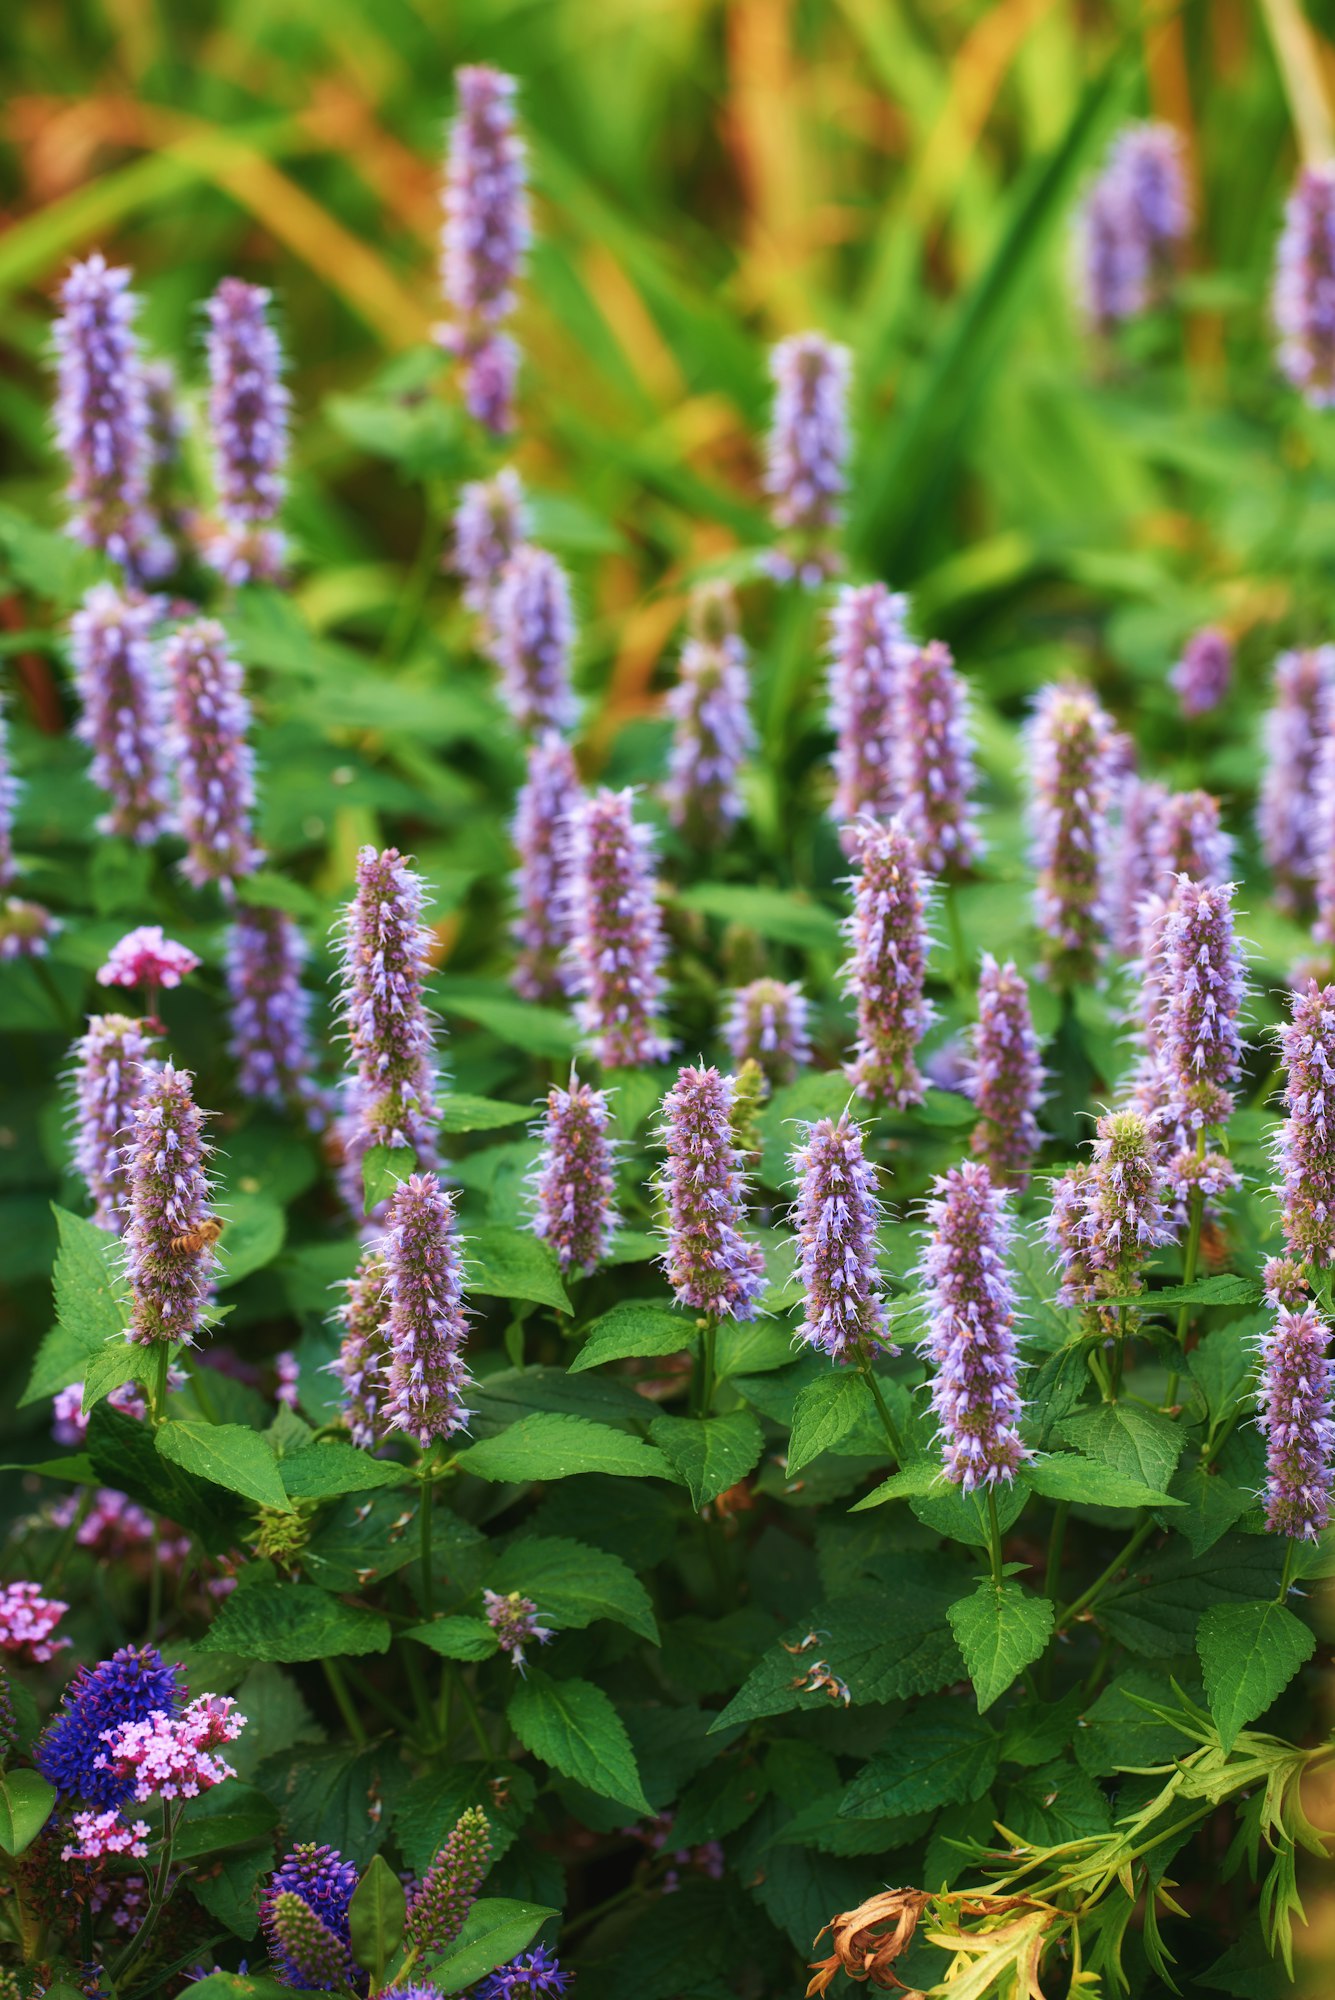 Harvesting and Using Hyssop